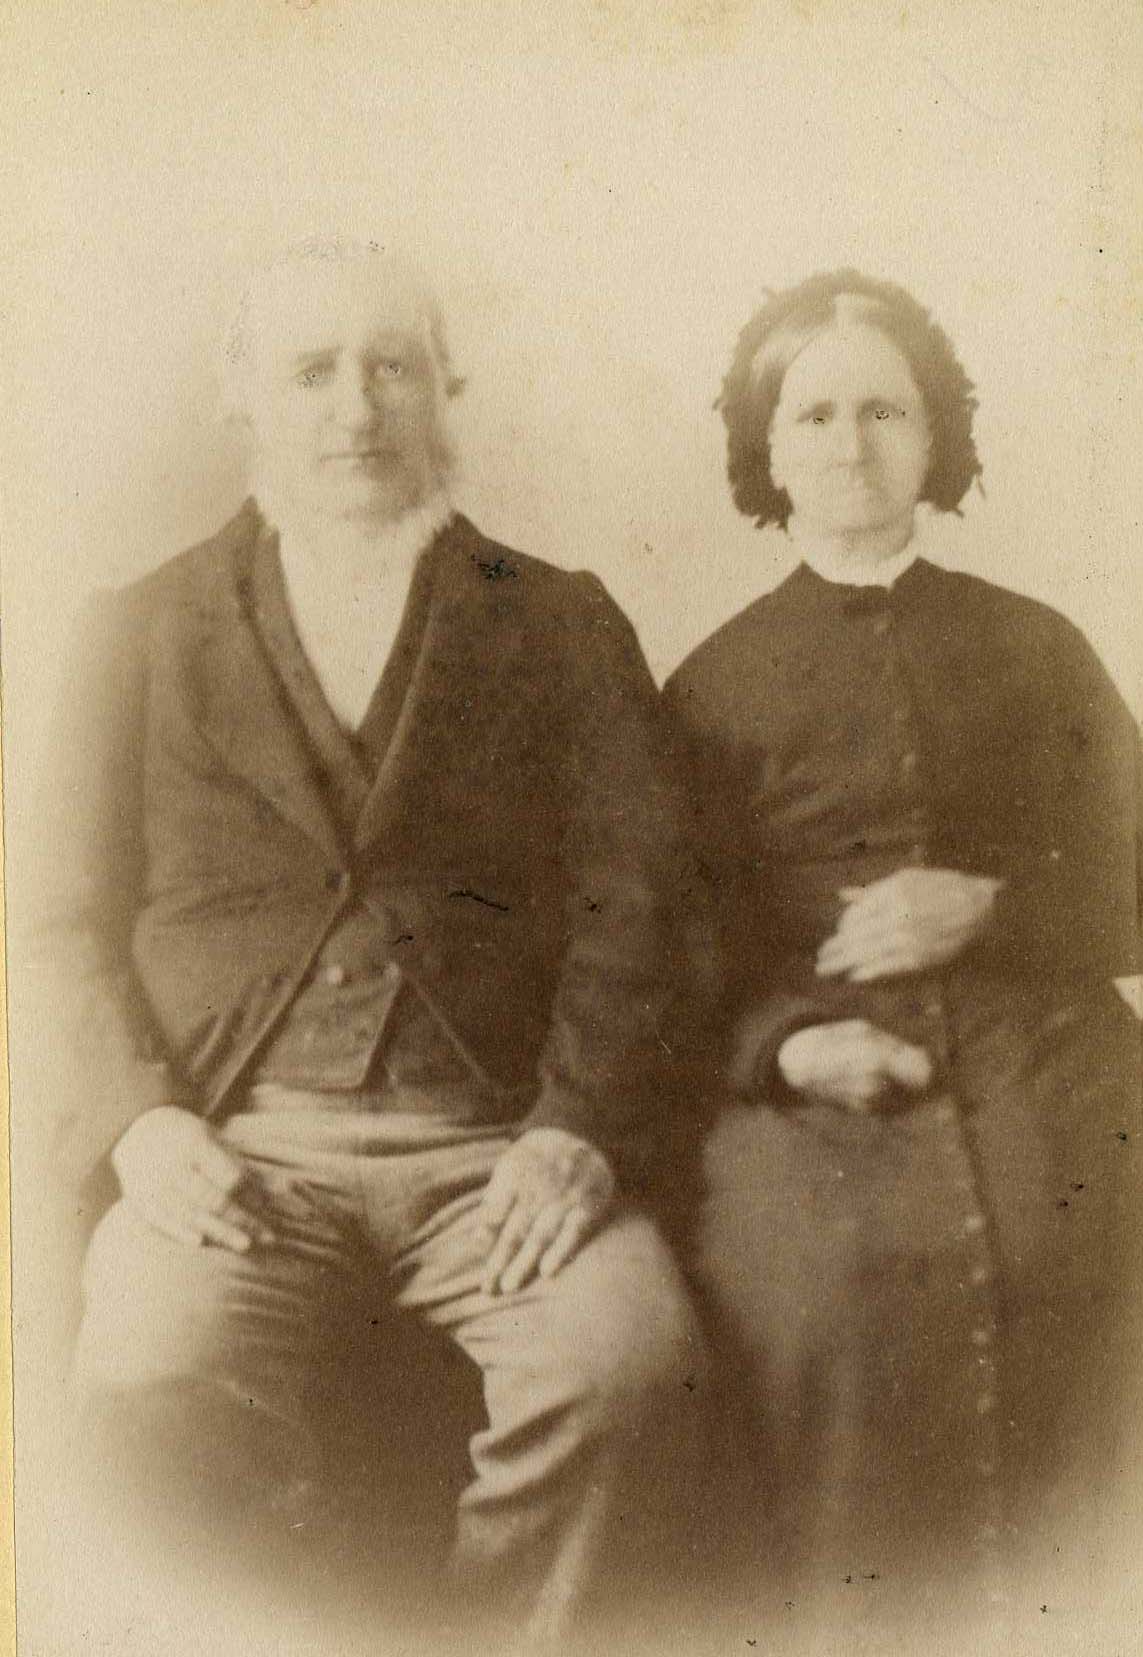 A photo of Simon DeLond SABEAN and Eliza McCONNELL